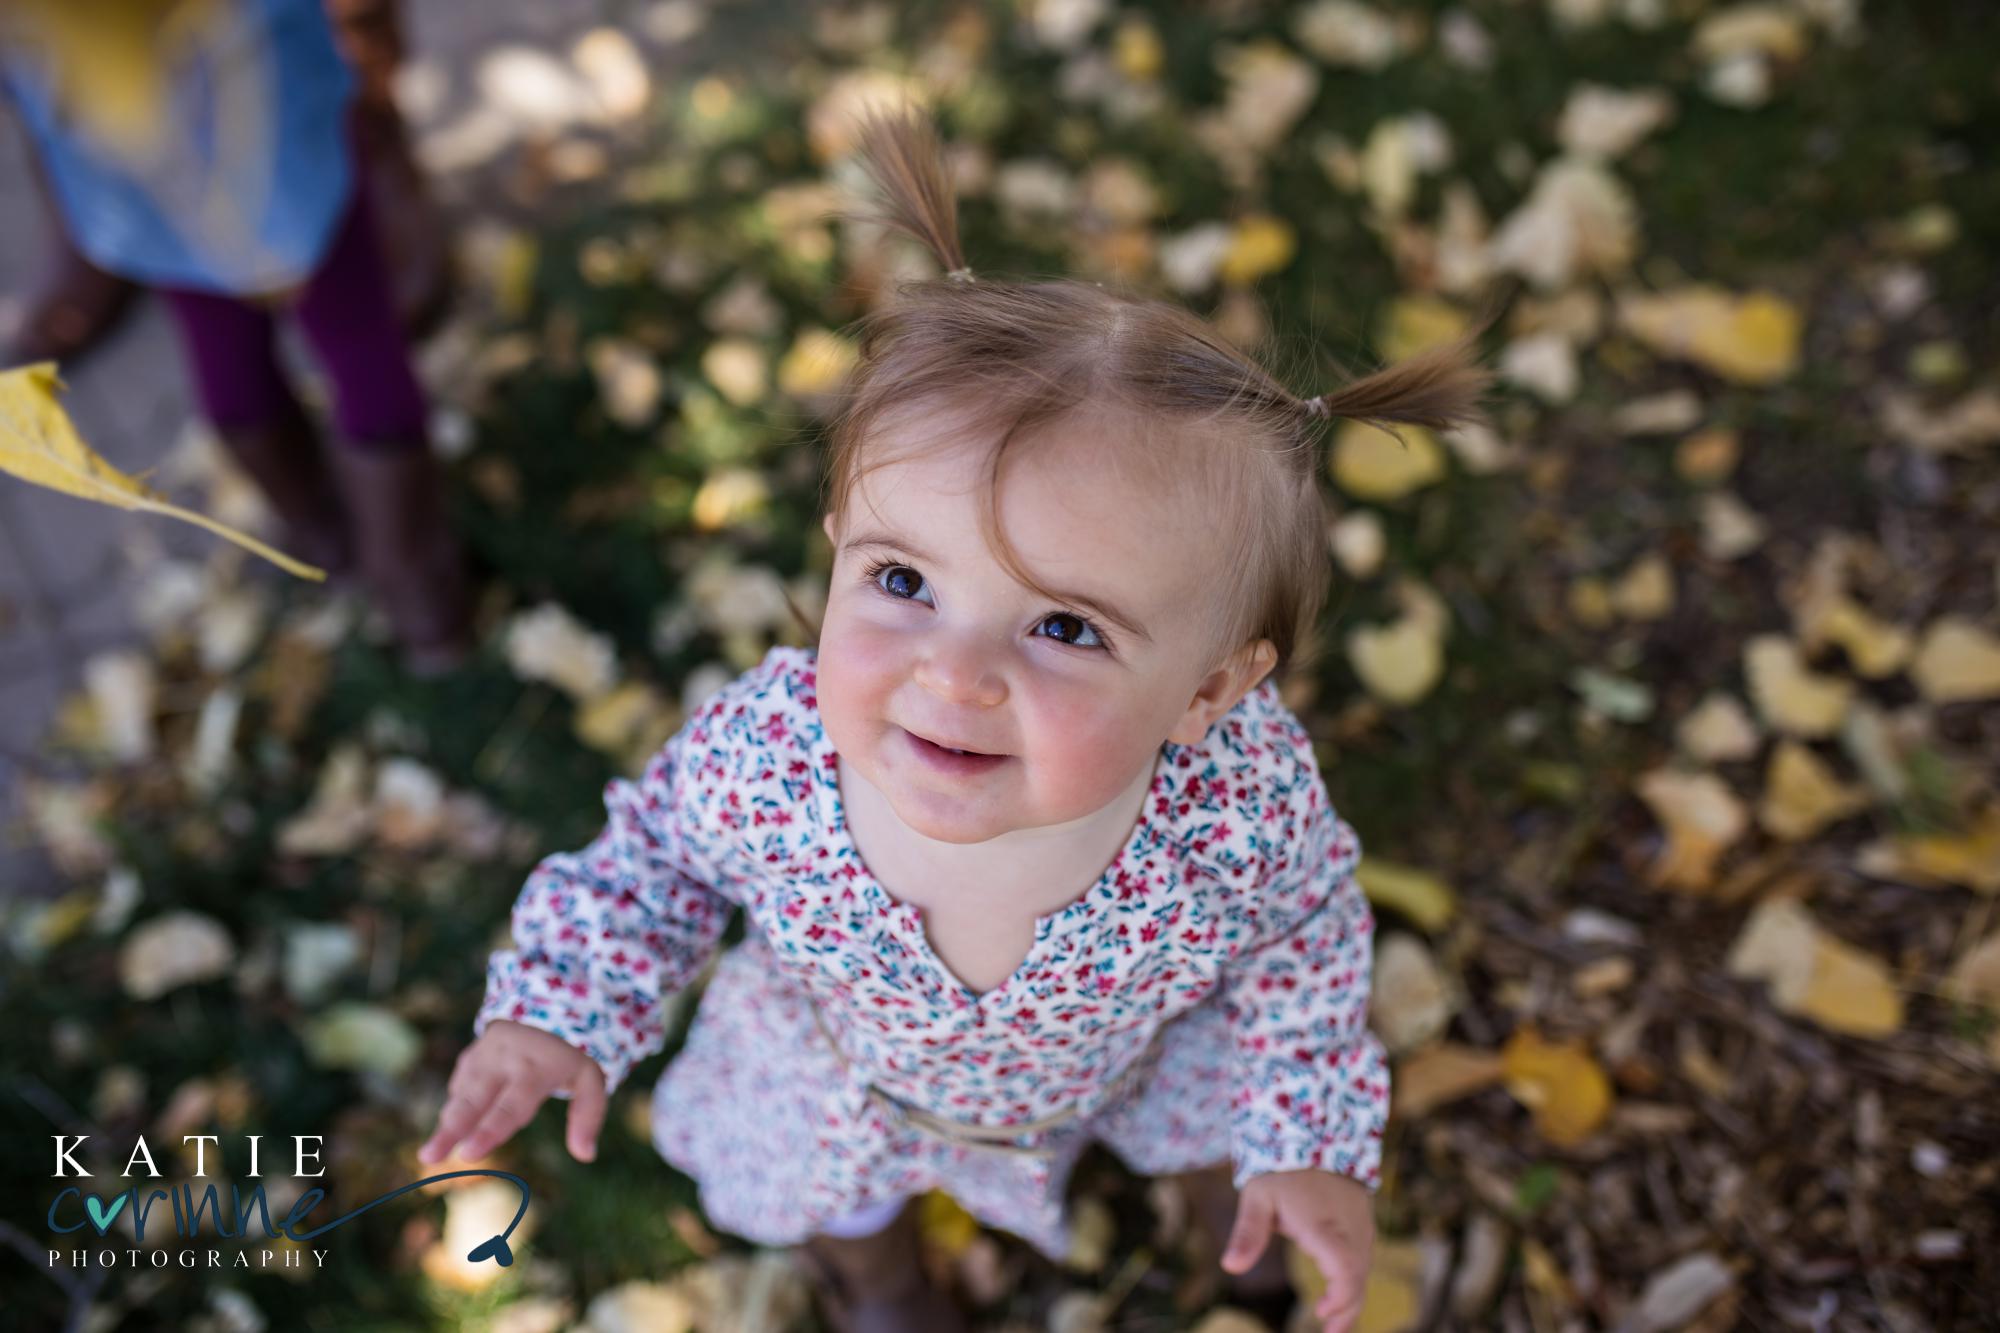 Cute Fall Family photos with Kids